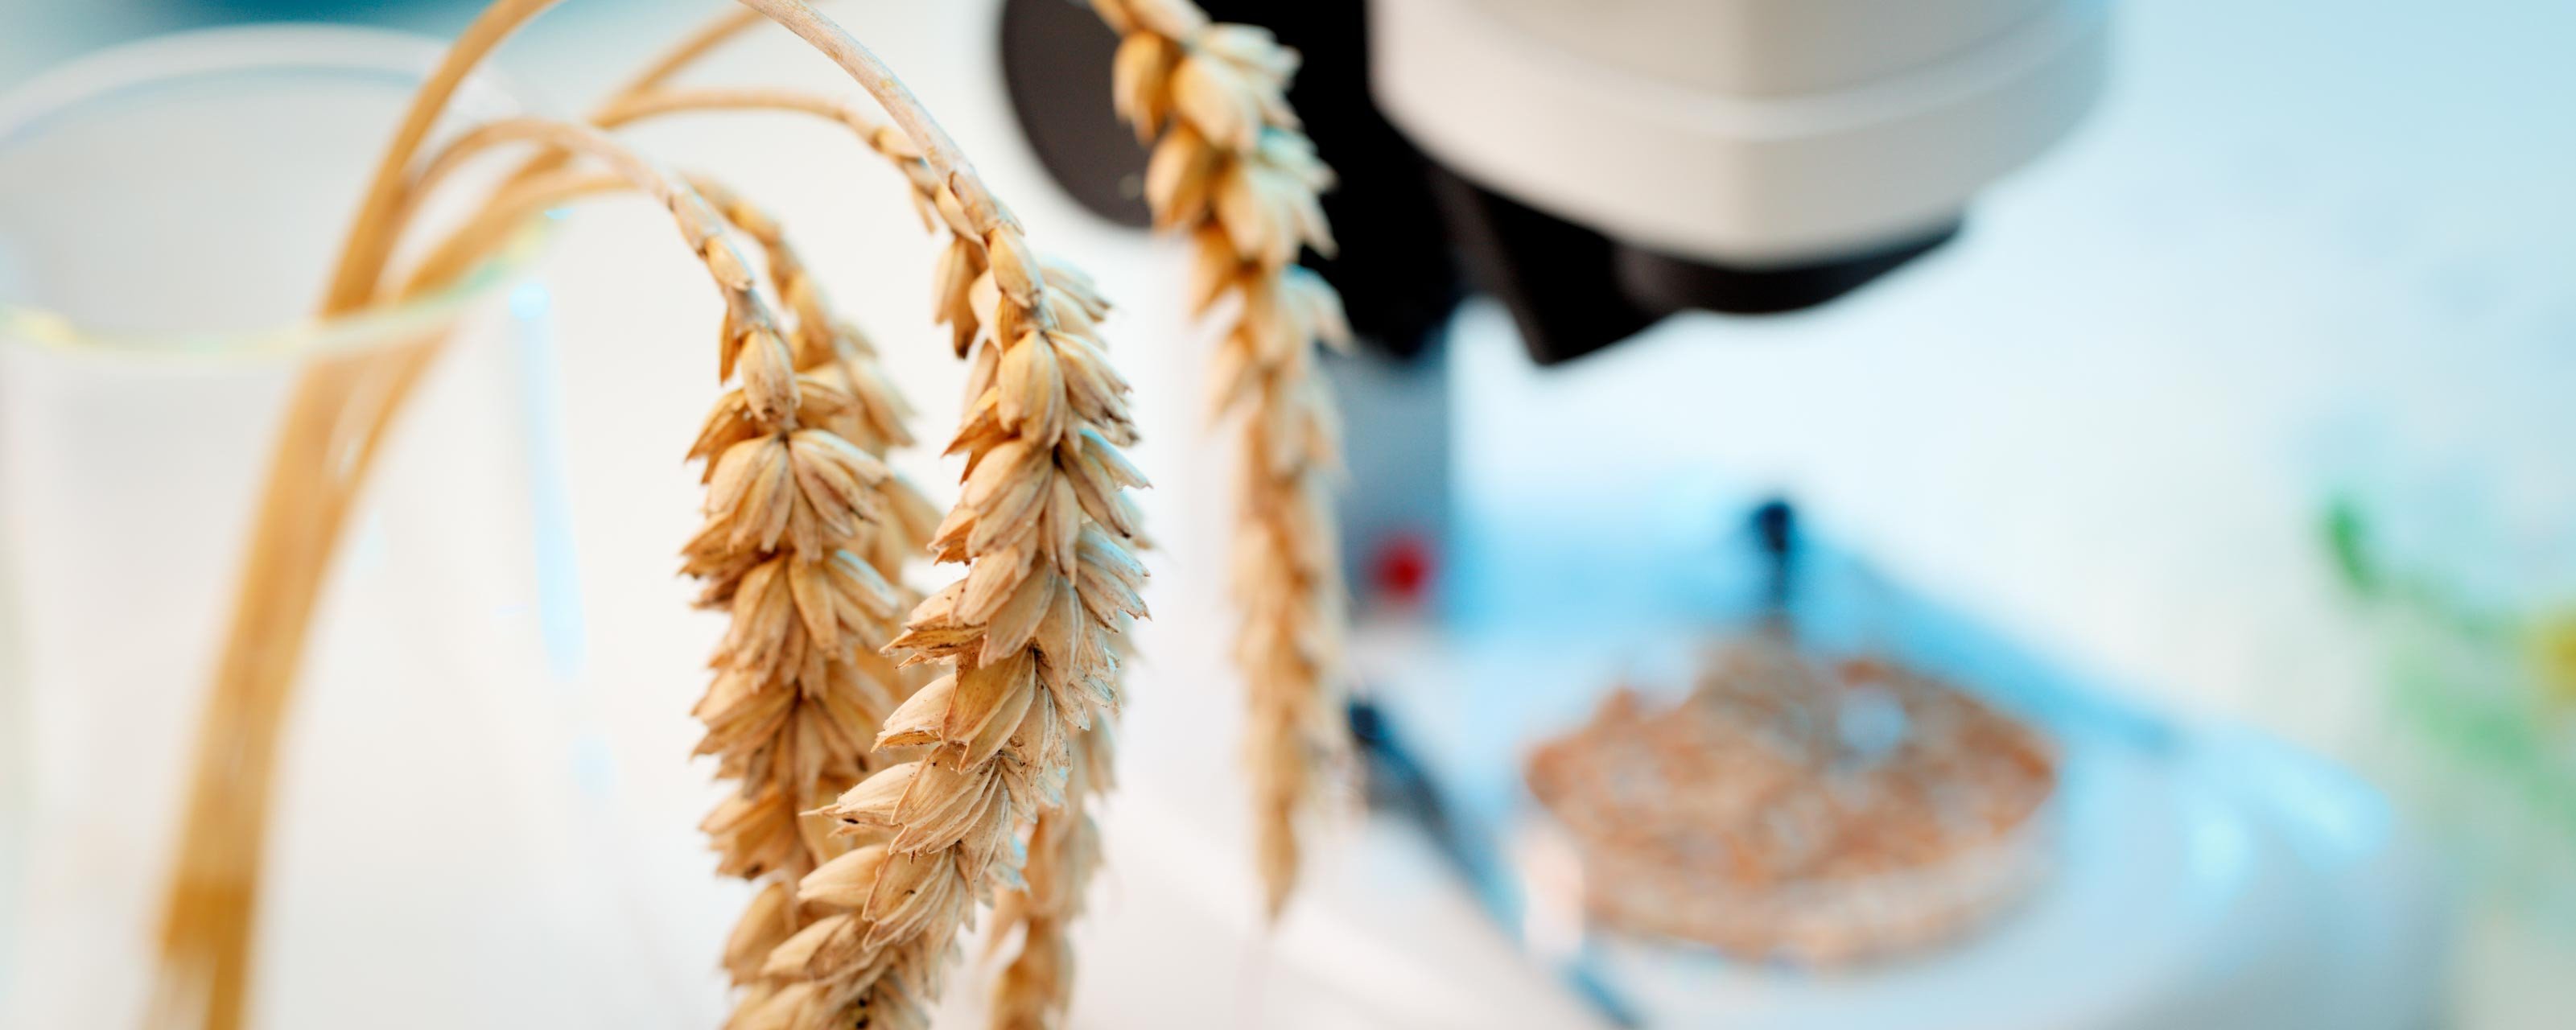 The wheat genome was edited to boost resistance to powdery mildew. Photo: Shutterstock 